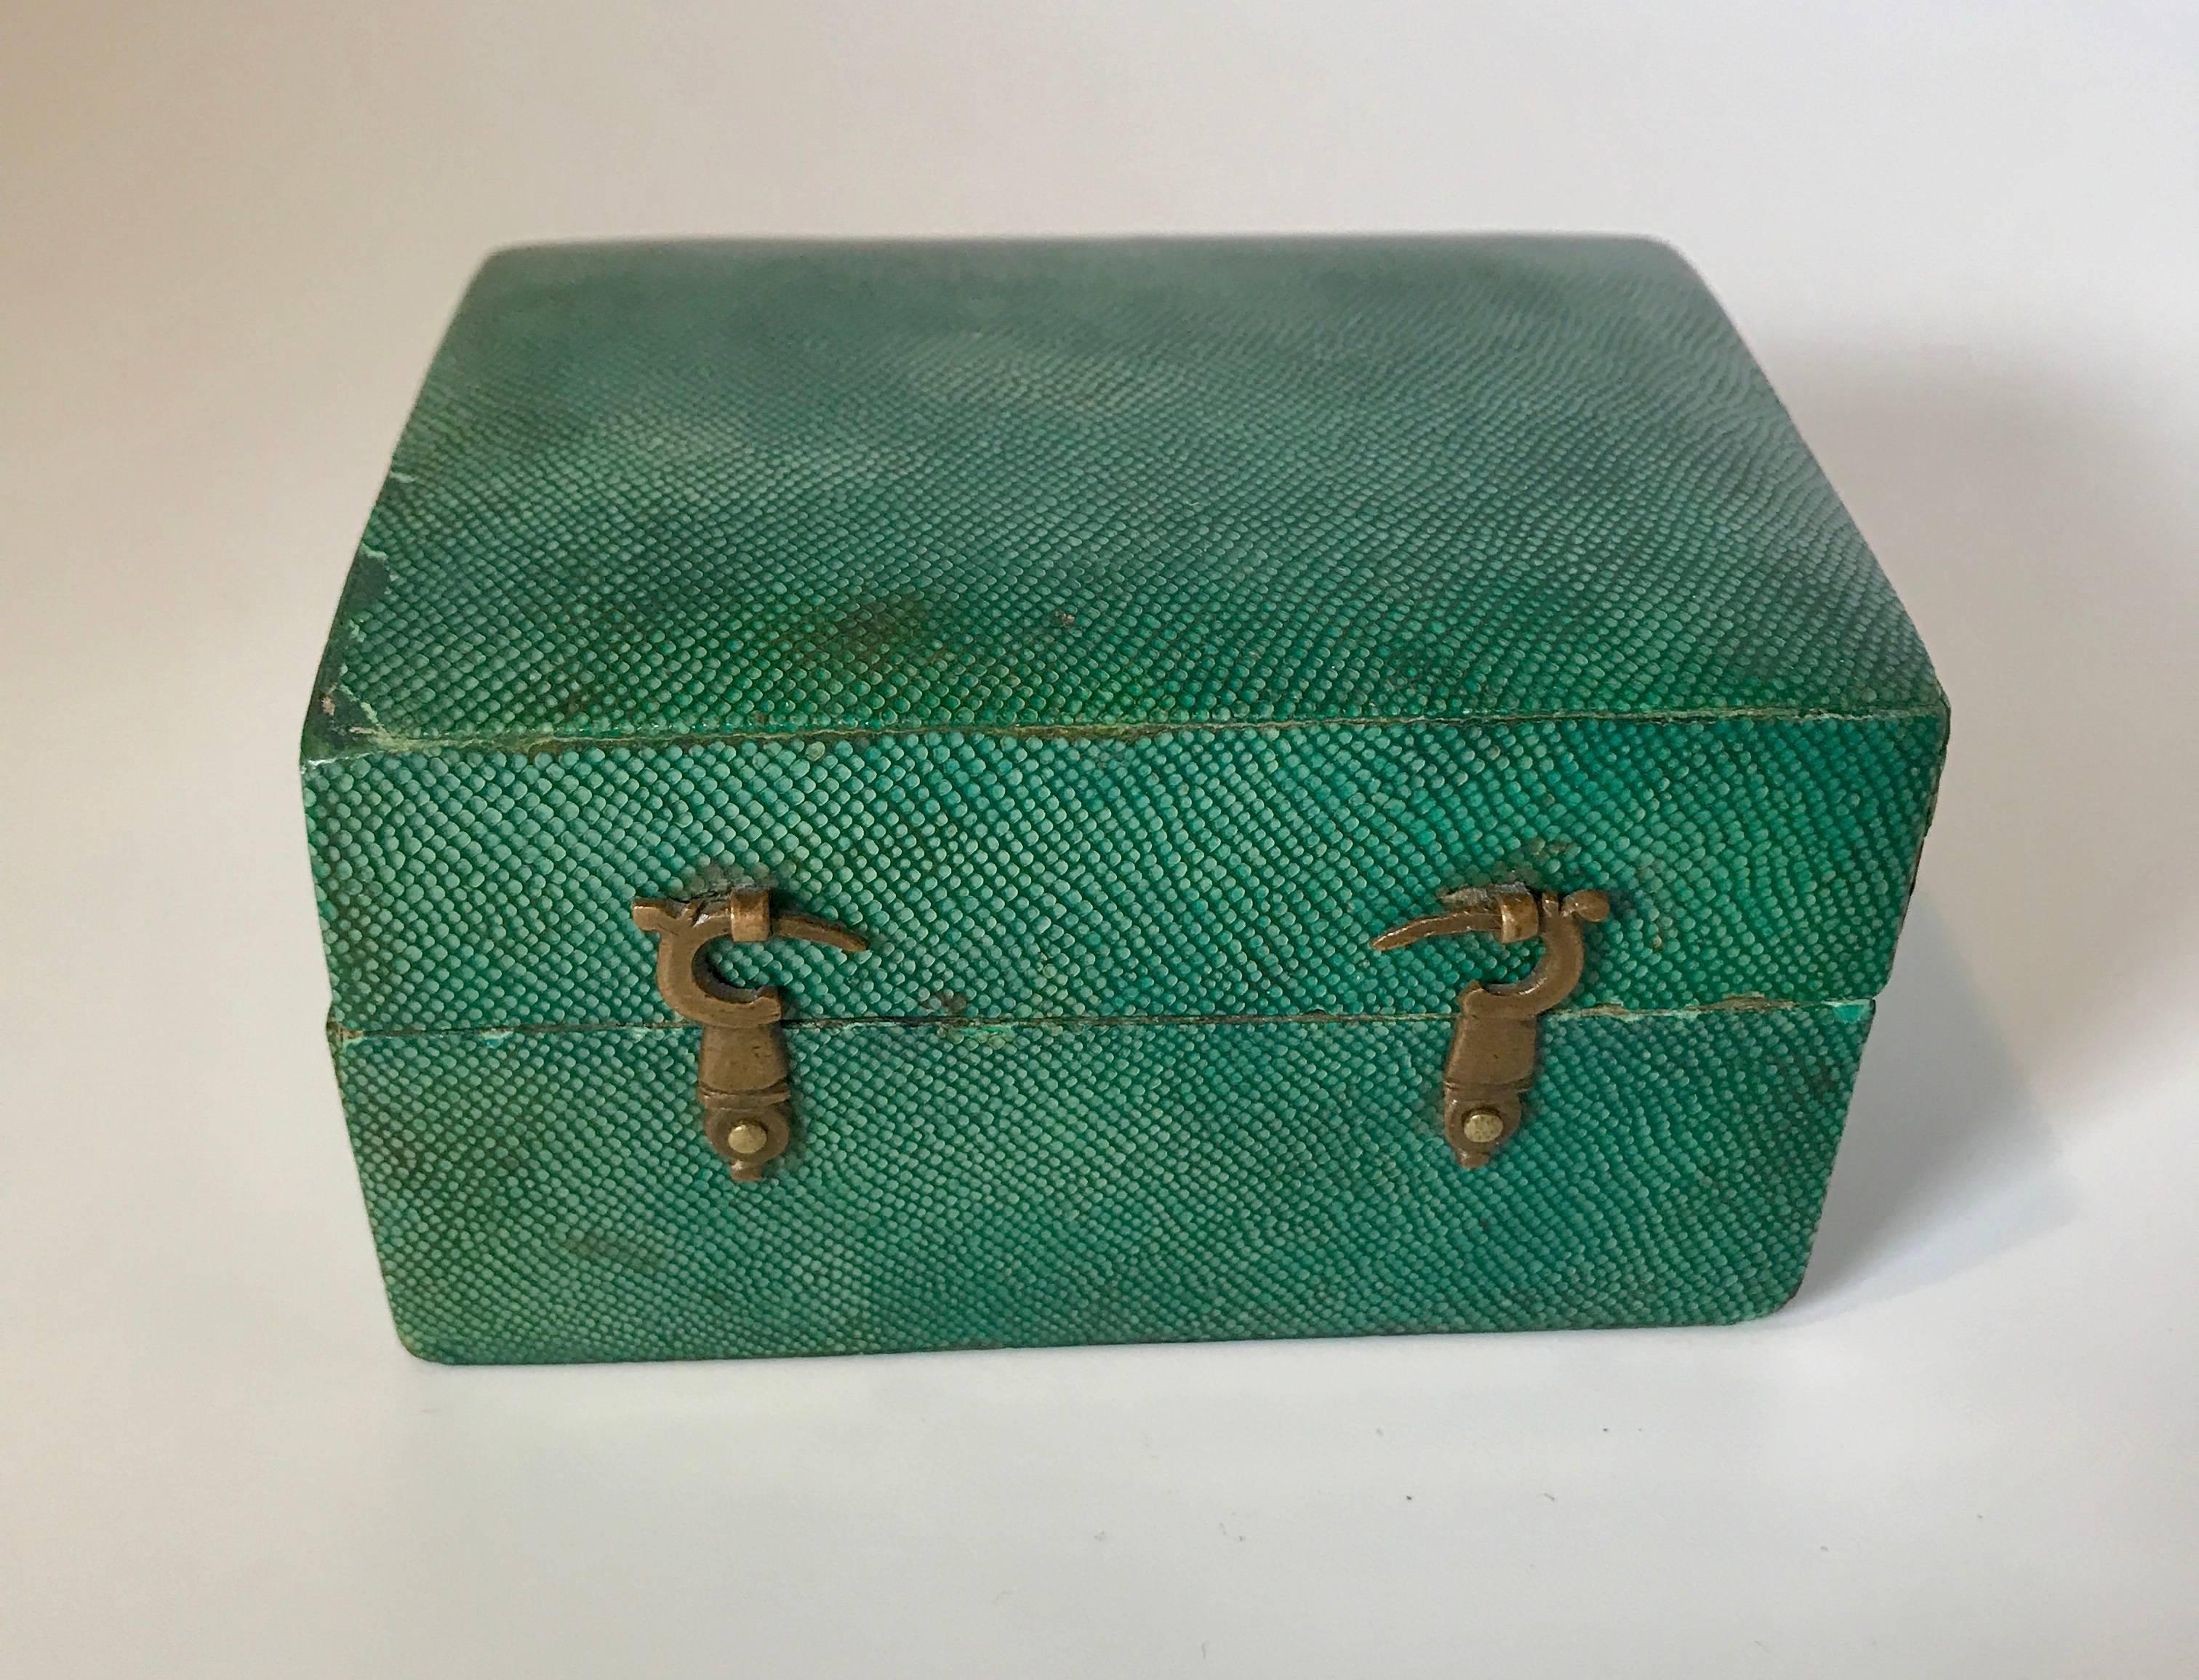 Mid-18th century shagreen box with green leather interior with hook and eye clasp.